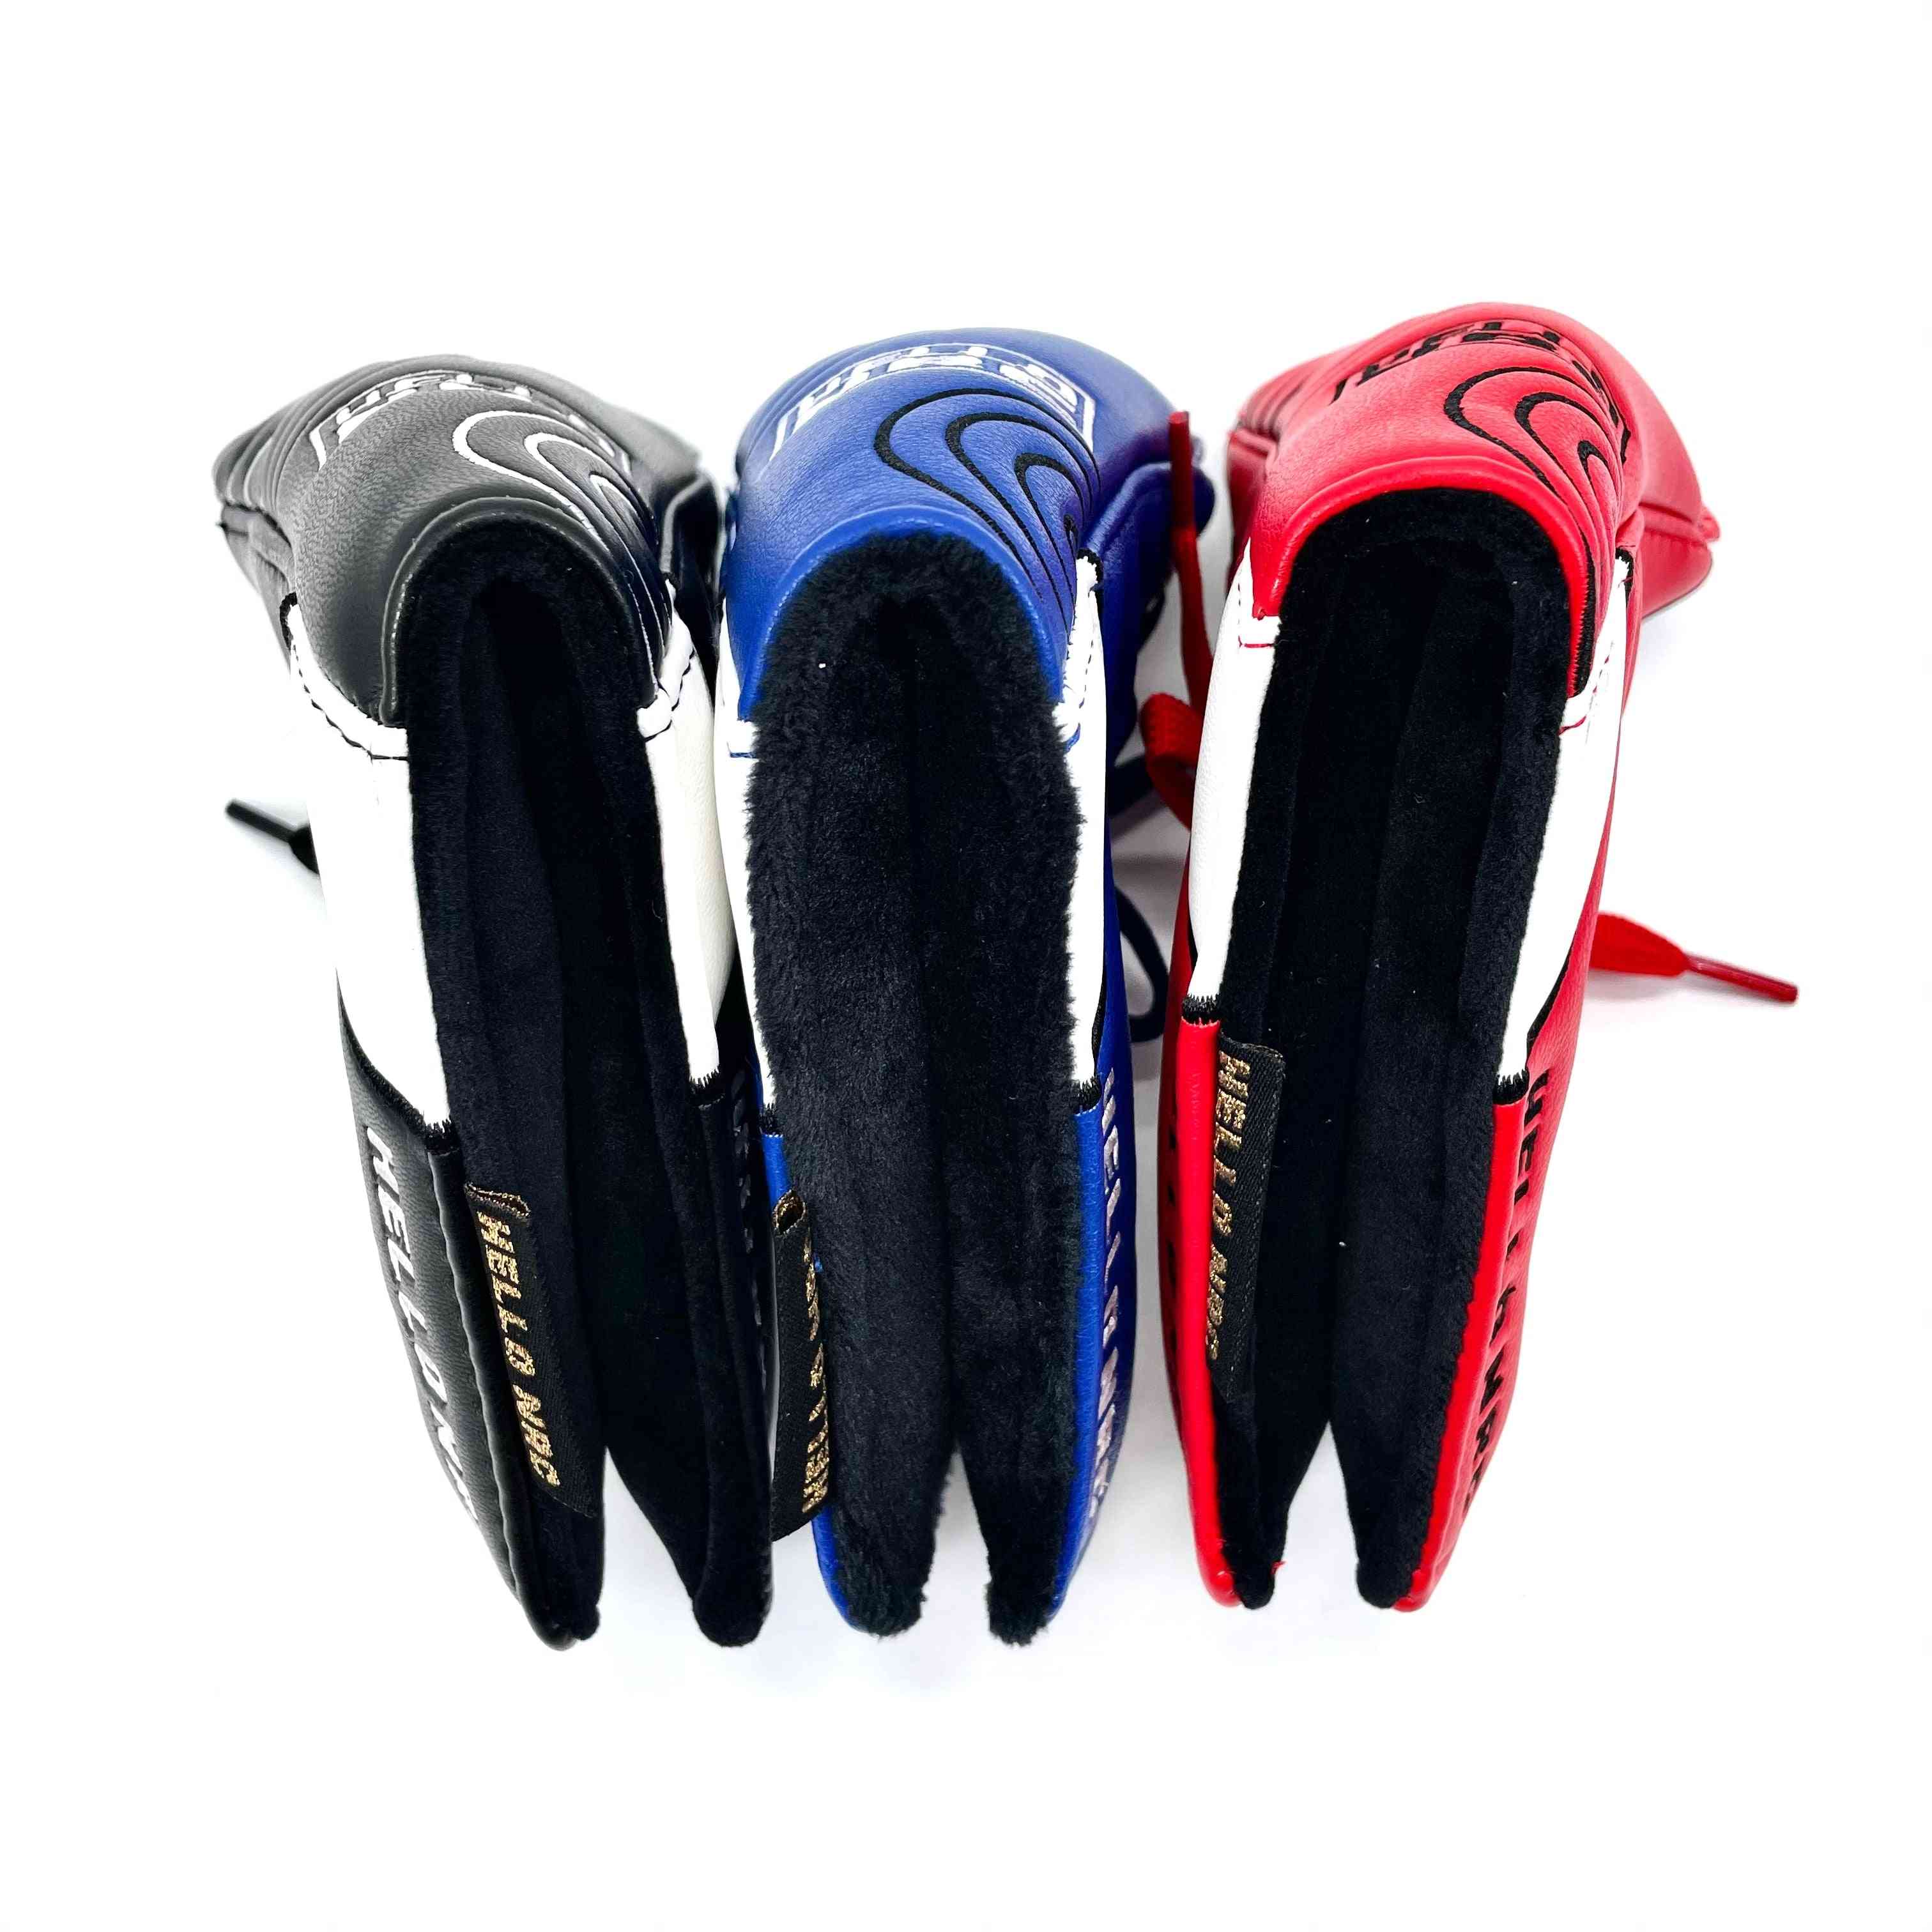 New L-shaped Golf Club Blade Putter Covers